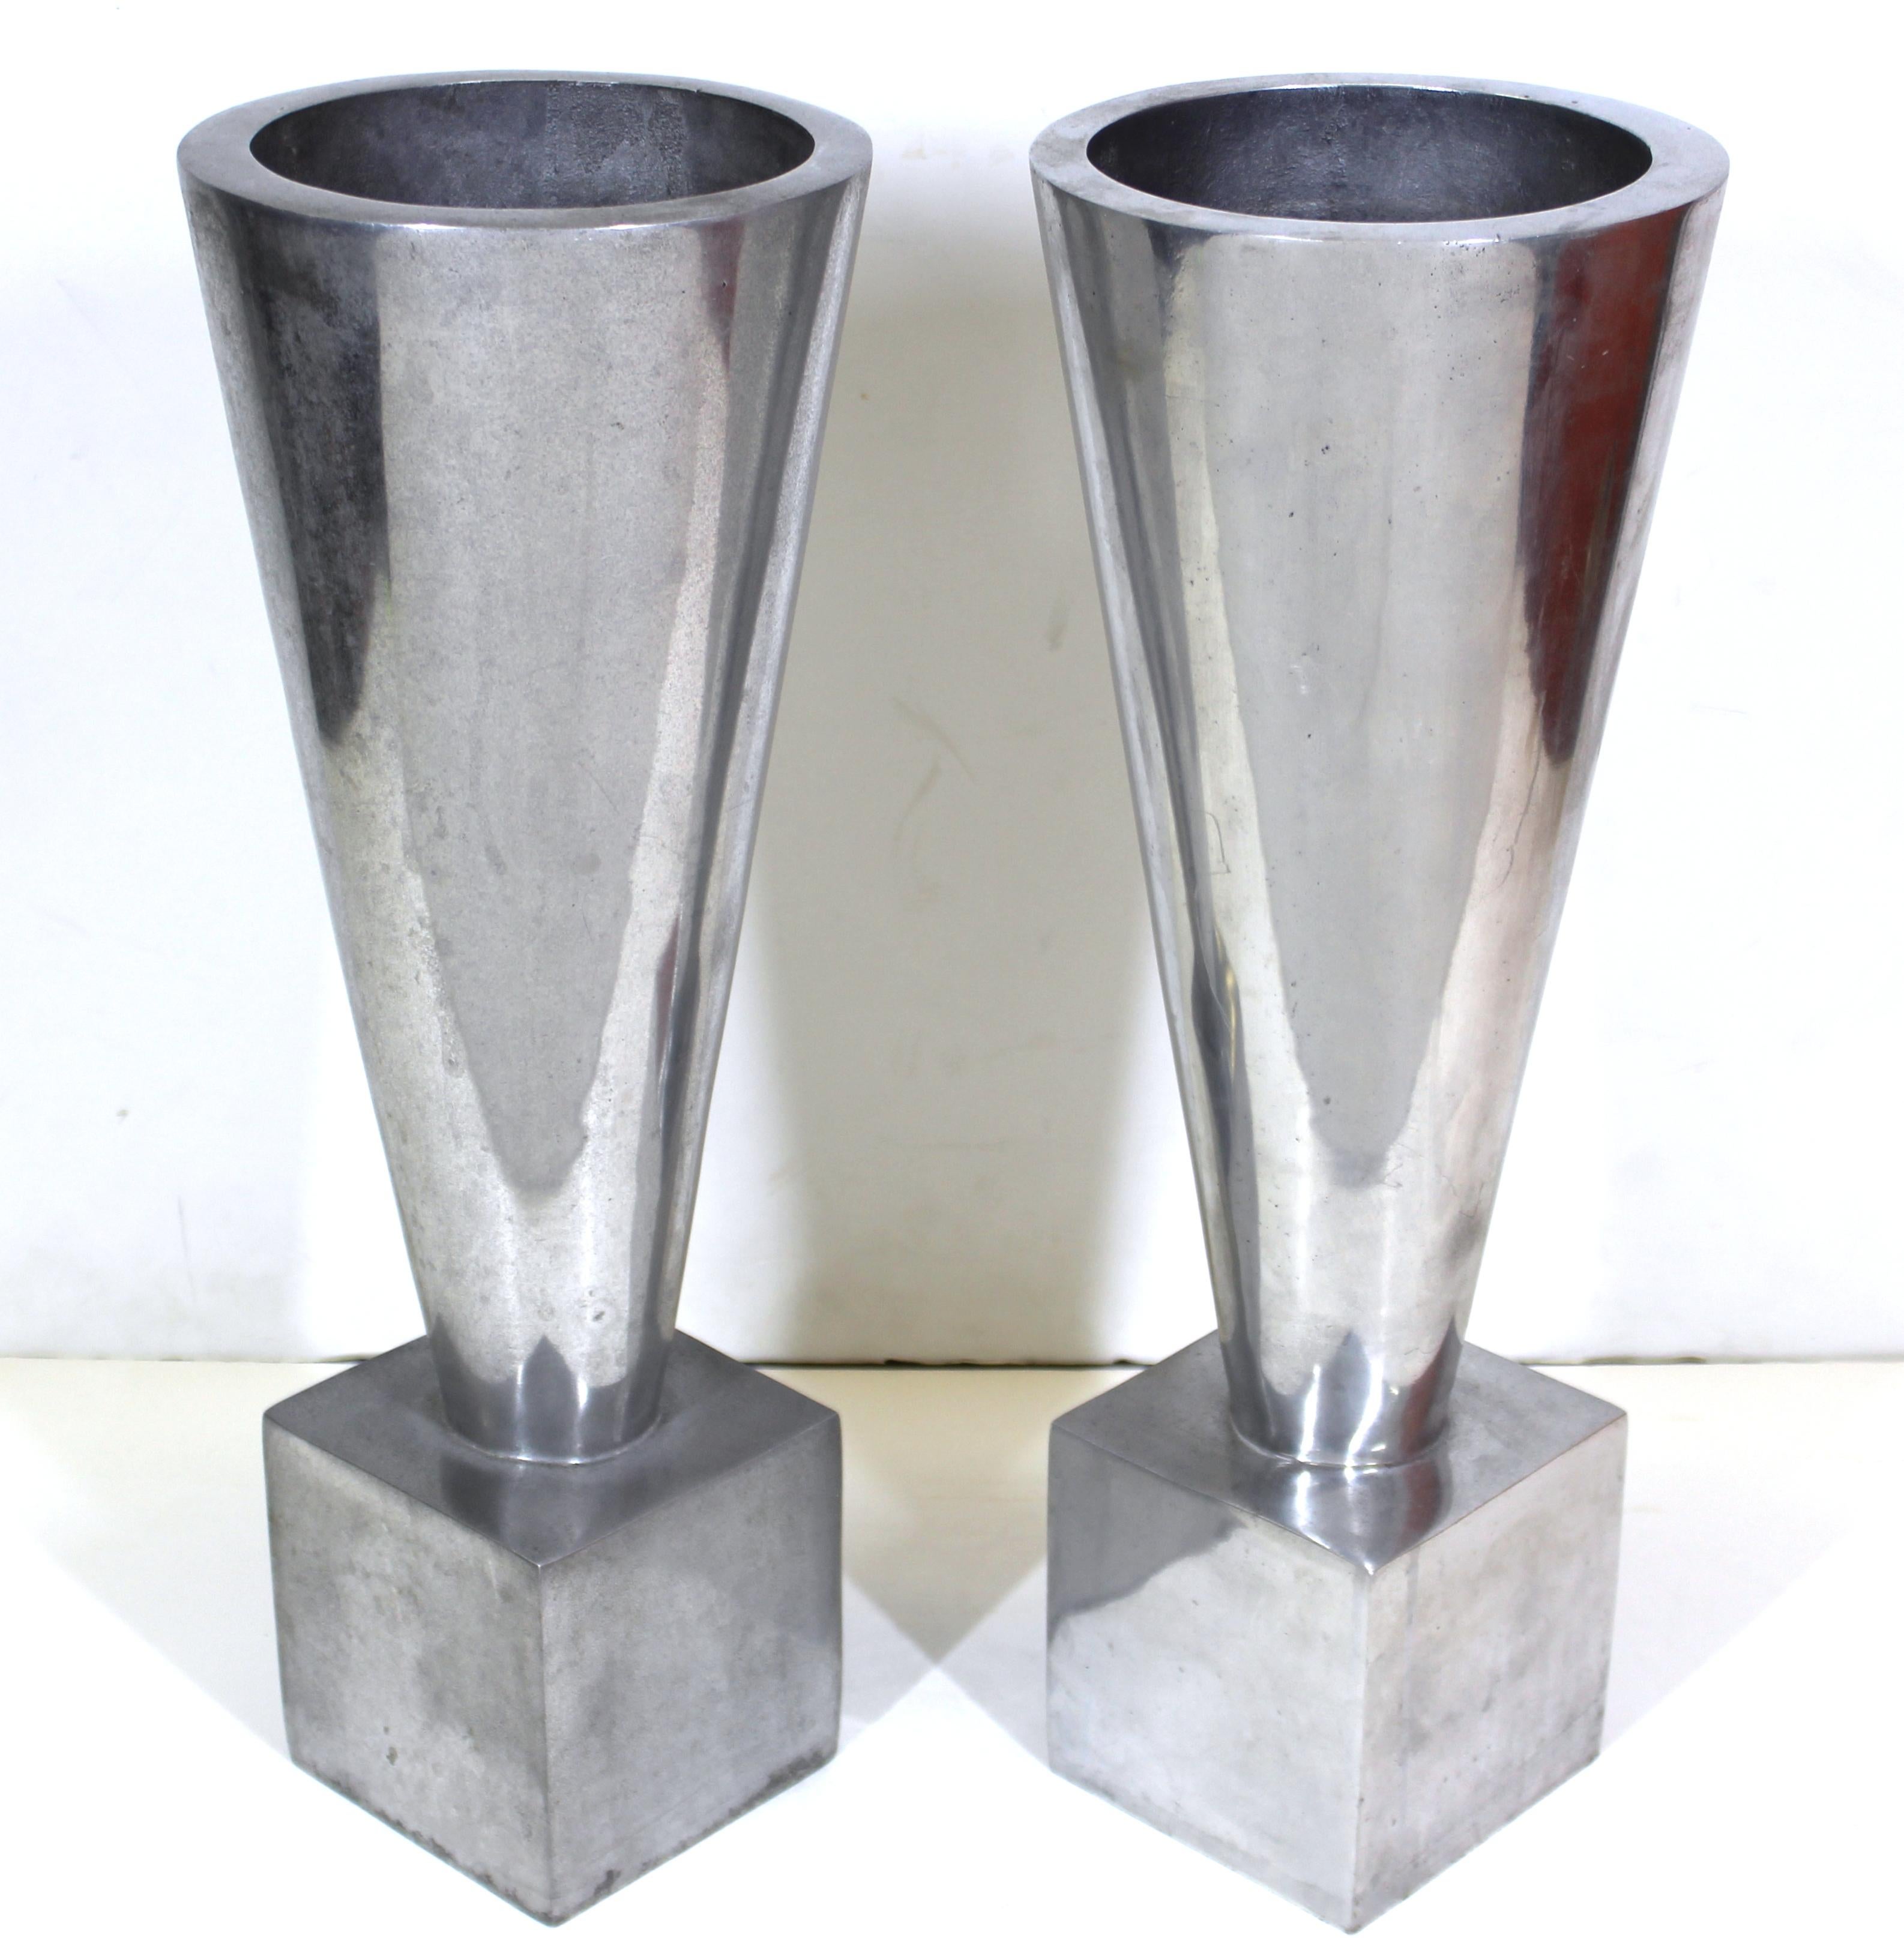 Modernist pair of heavy cast aluminum urns in conical shape on cube footing, made by AZ Cast Products. Makers mark stamped on to the bottom. The pair was made during the 1970s in the United States and is in great vintage condition with